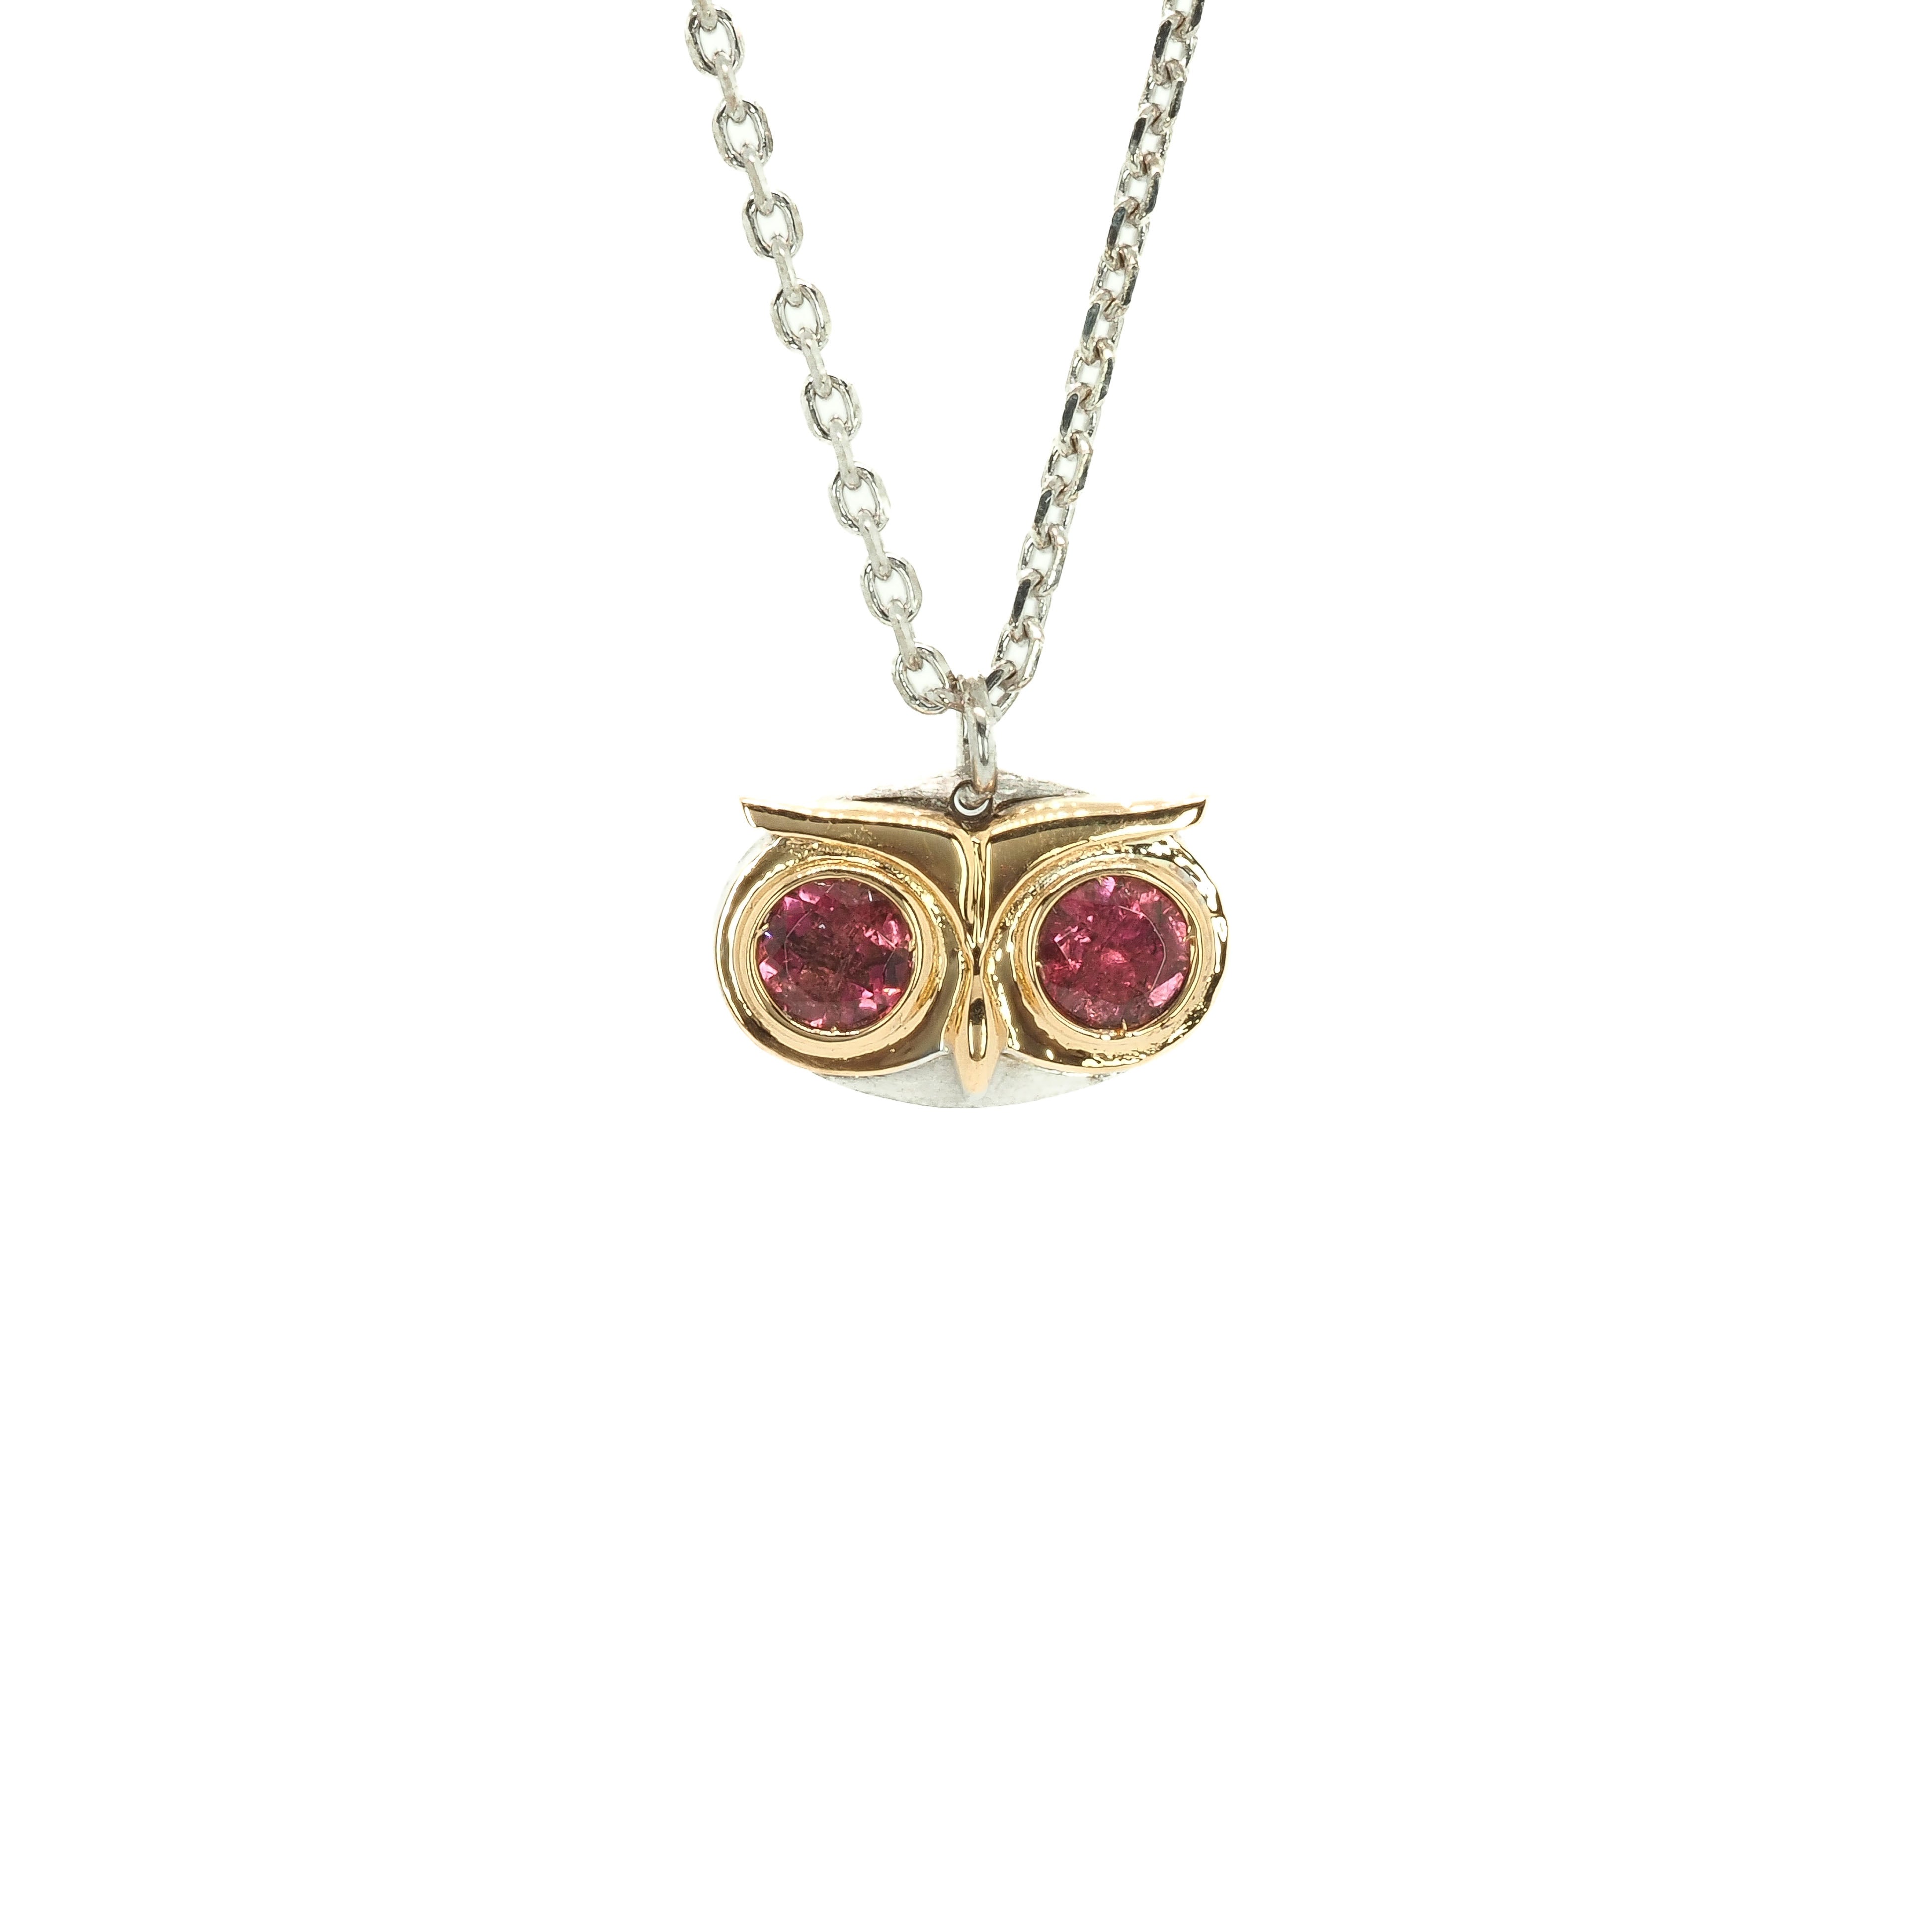 Taru Jewelry lovely owl necklace, handcrafted from 18K gold and sterling silver, captures the essence of the wise and mysterious bird. The owl&#39;s eyes are set with sparkling tourmaline gemstones, adding a touch of color and elegance to the piece. The owl represents a symbol of wisdom and the ability to see and hear what others may miss. With its protective gaze and ability to to go unseen, the owl is considered an ideal messenger of secrets.